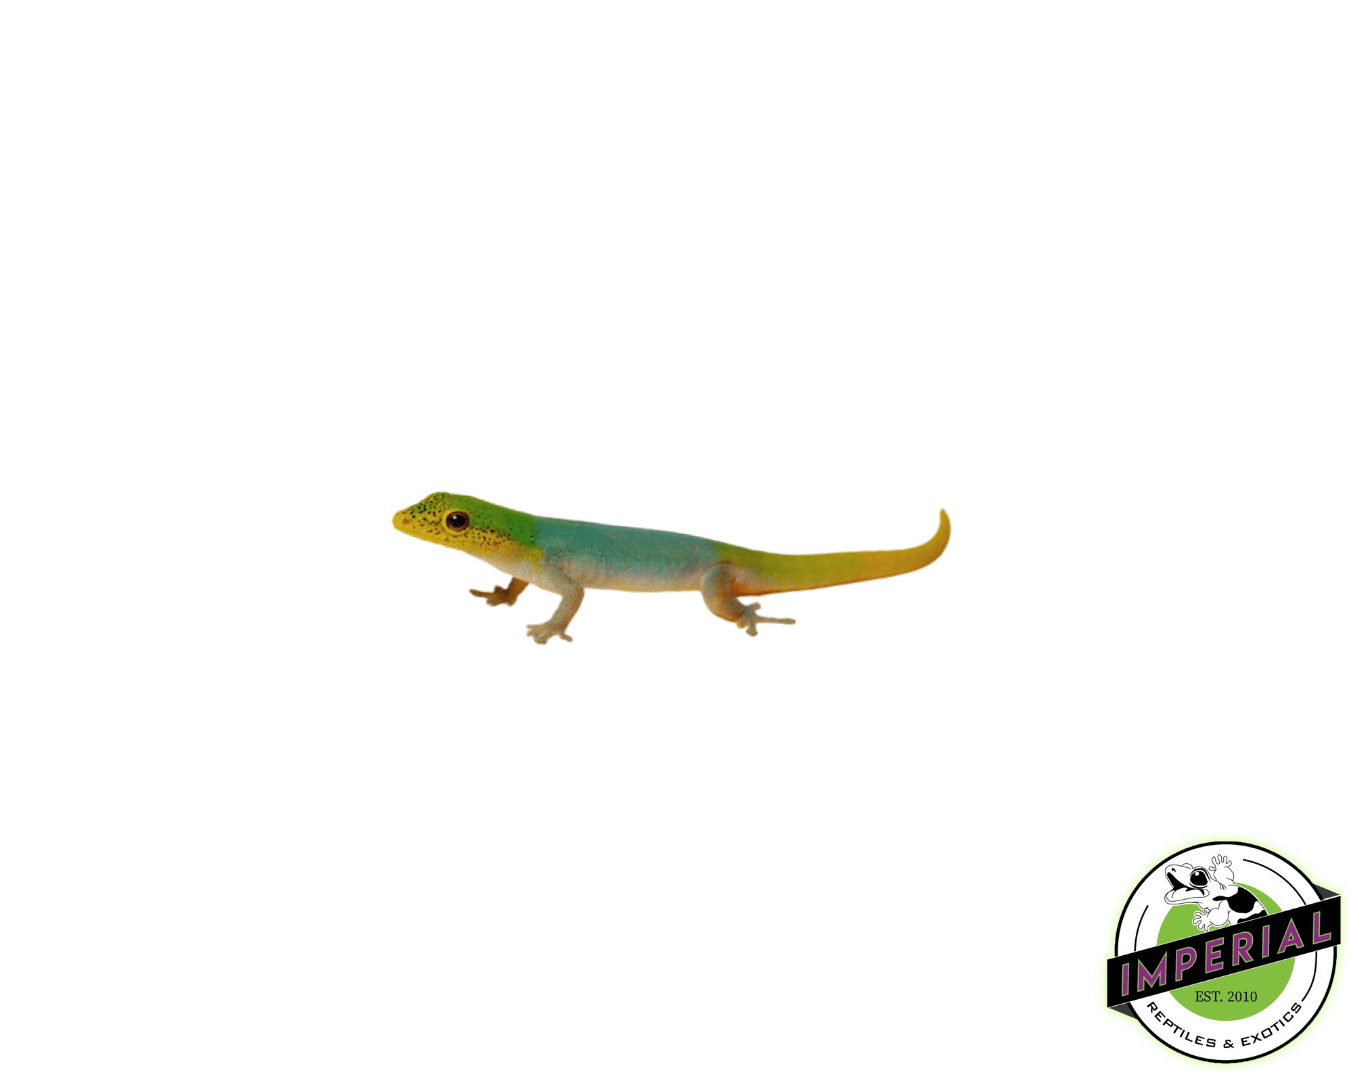 cameron dwarf  gecko for sale, buy reptiles online